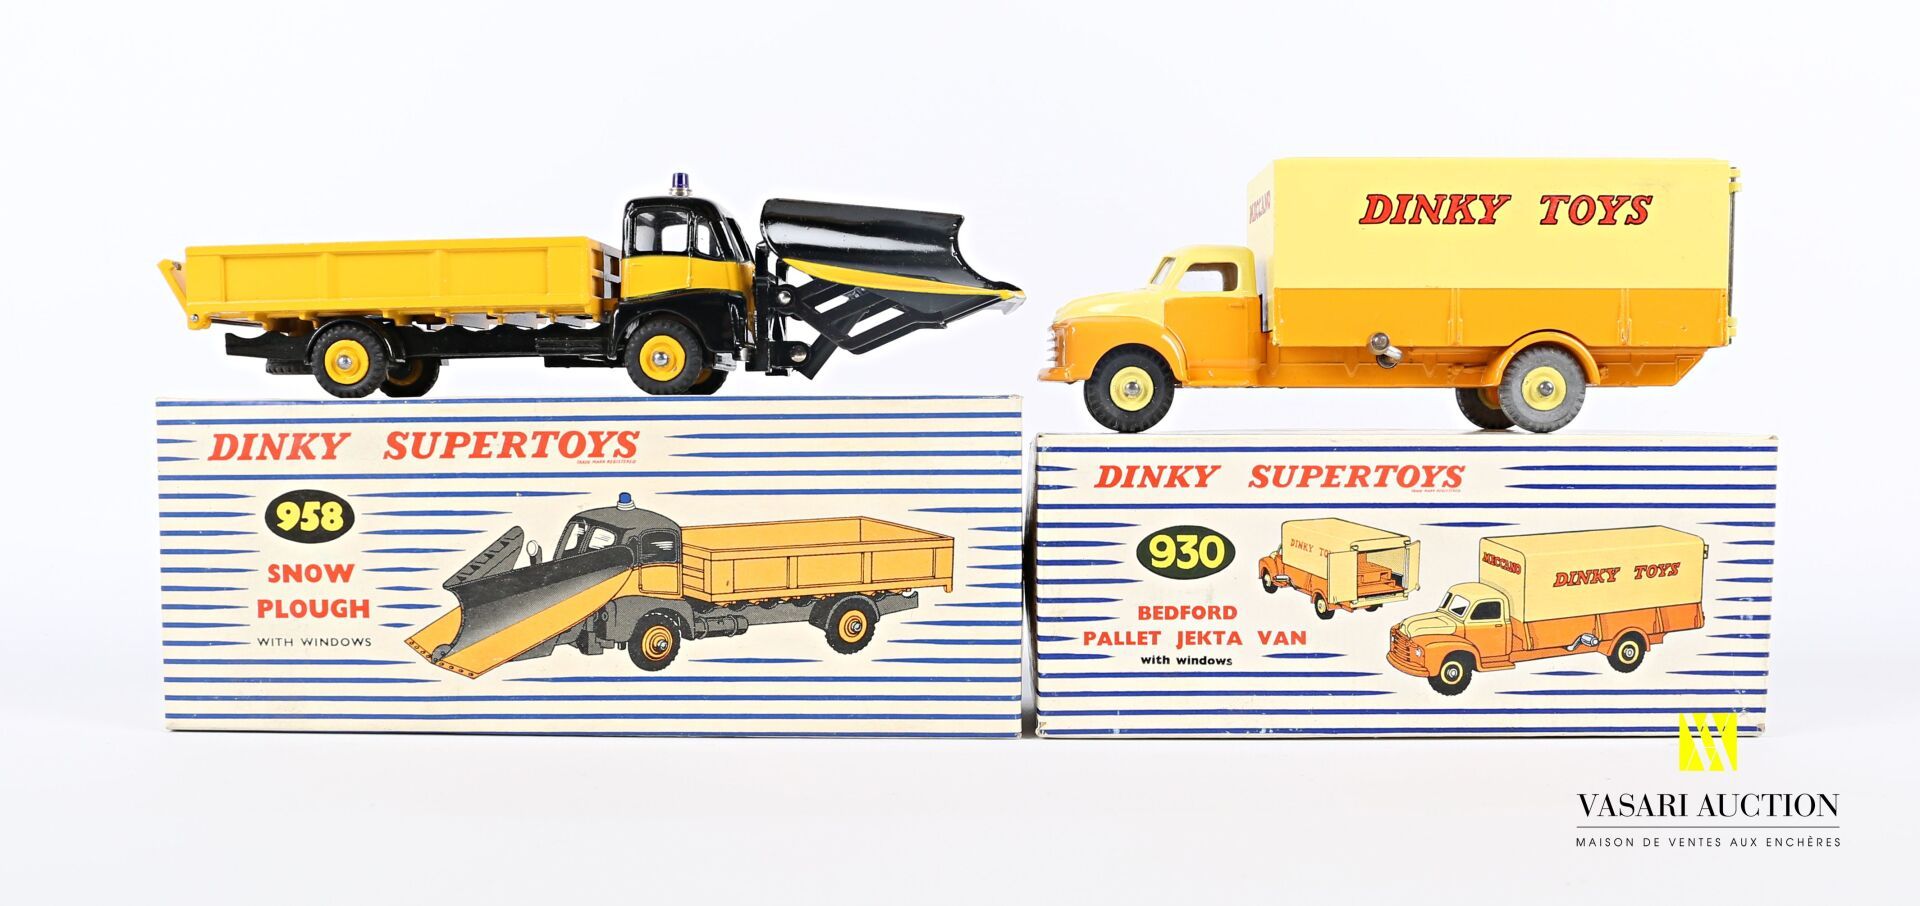 Null DINKY SUPERTOYS (GB MECCANO)

Quitanieves 958

Camión Bedford "Dinky Toys" &hellip;